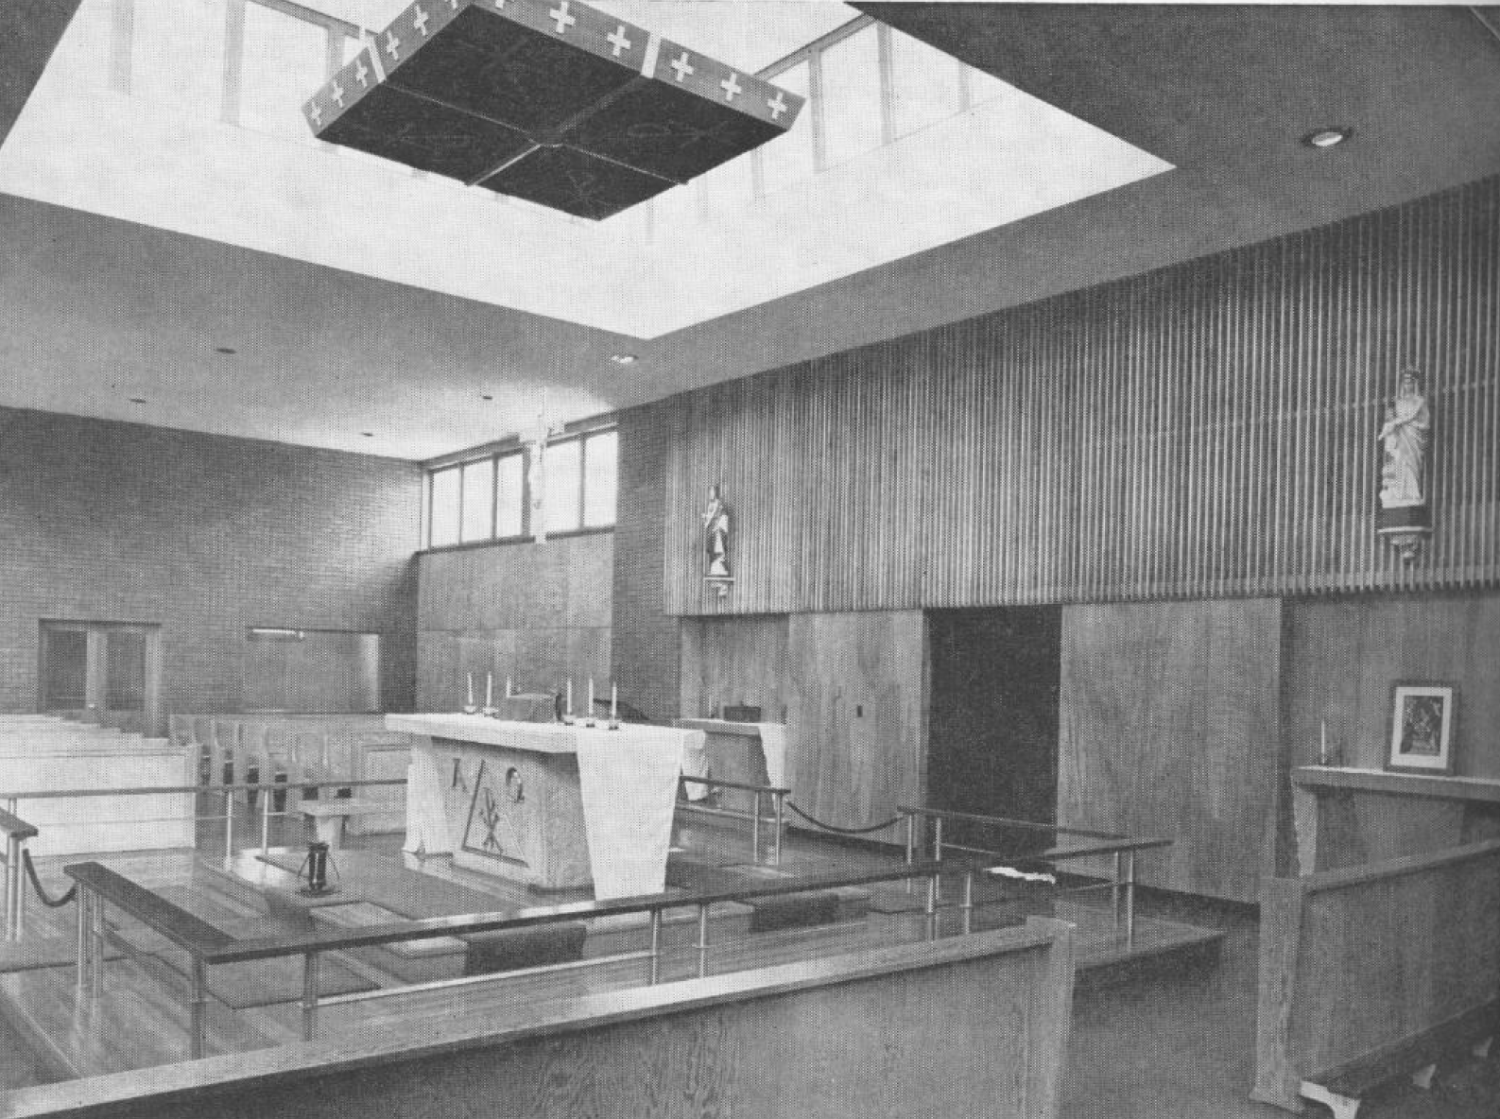 Image shows an archival photograph of the interior for Our Lady of Victory Church. The walls are brick and wood panelled, with a skylight positioned over the altar.